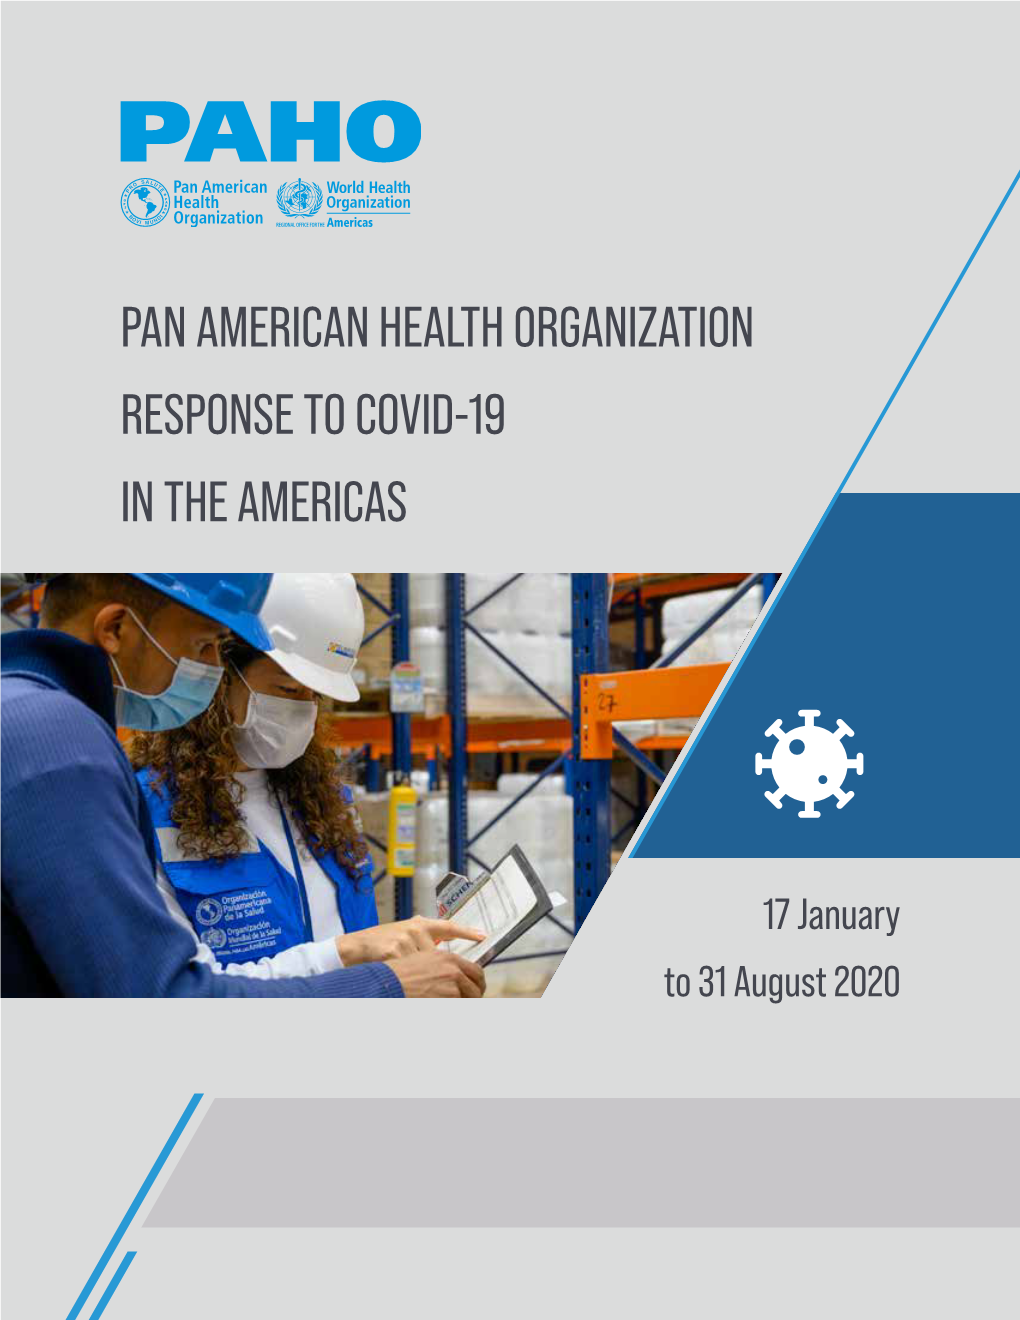 Pan American Health Organization Response to Covid-19 in the Americas